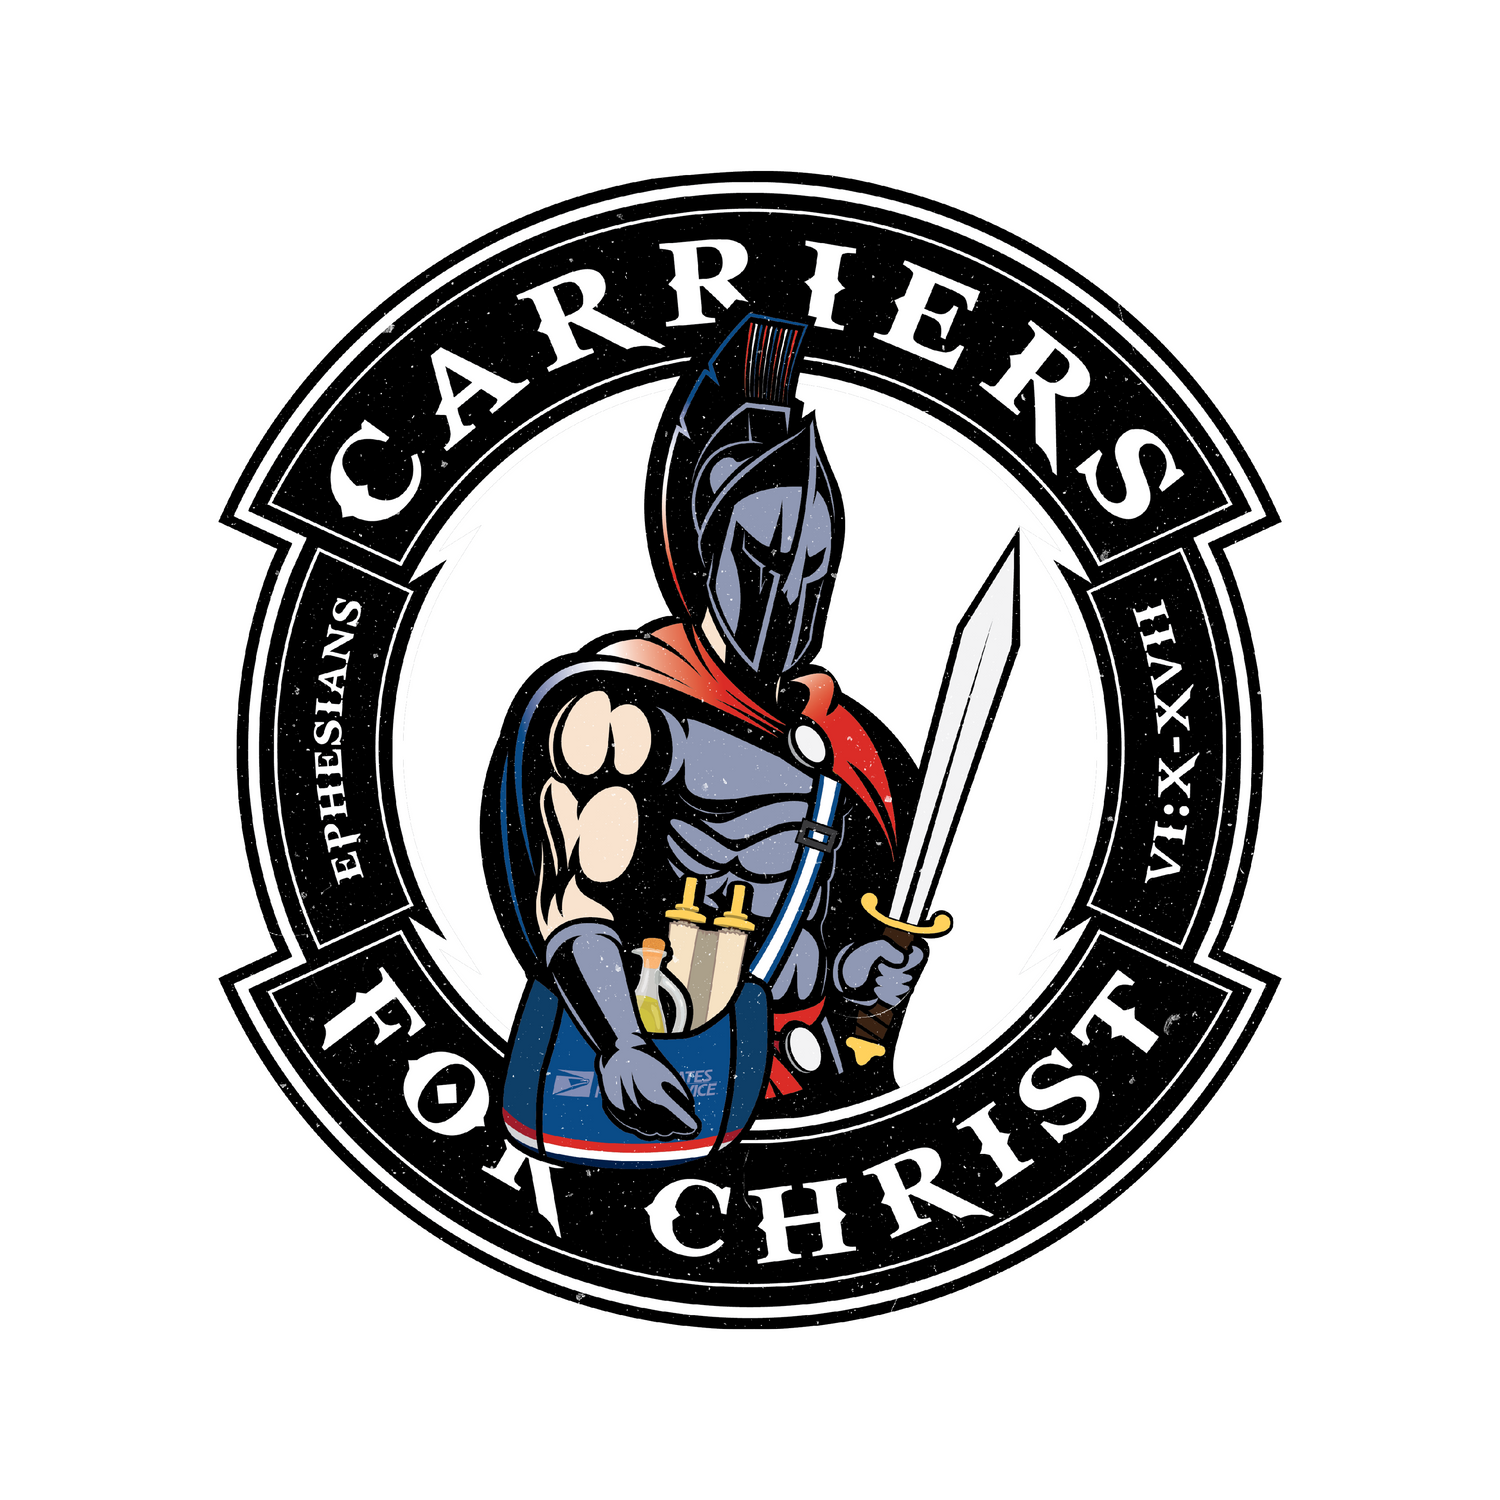 Carriers for Christ